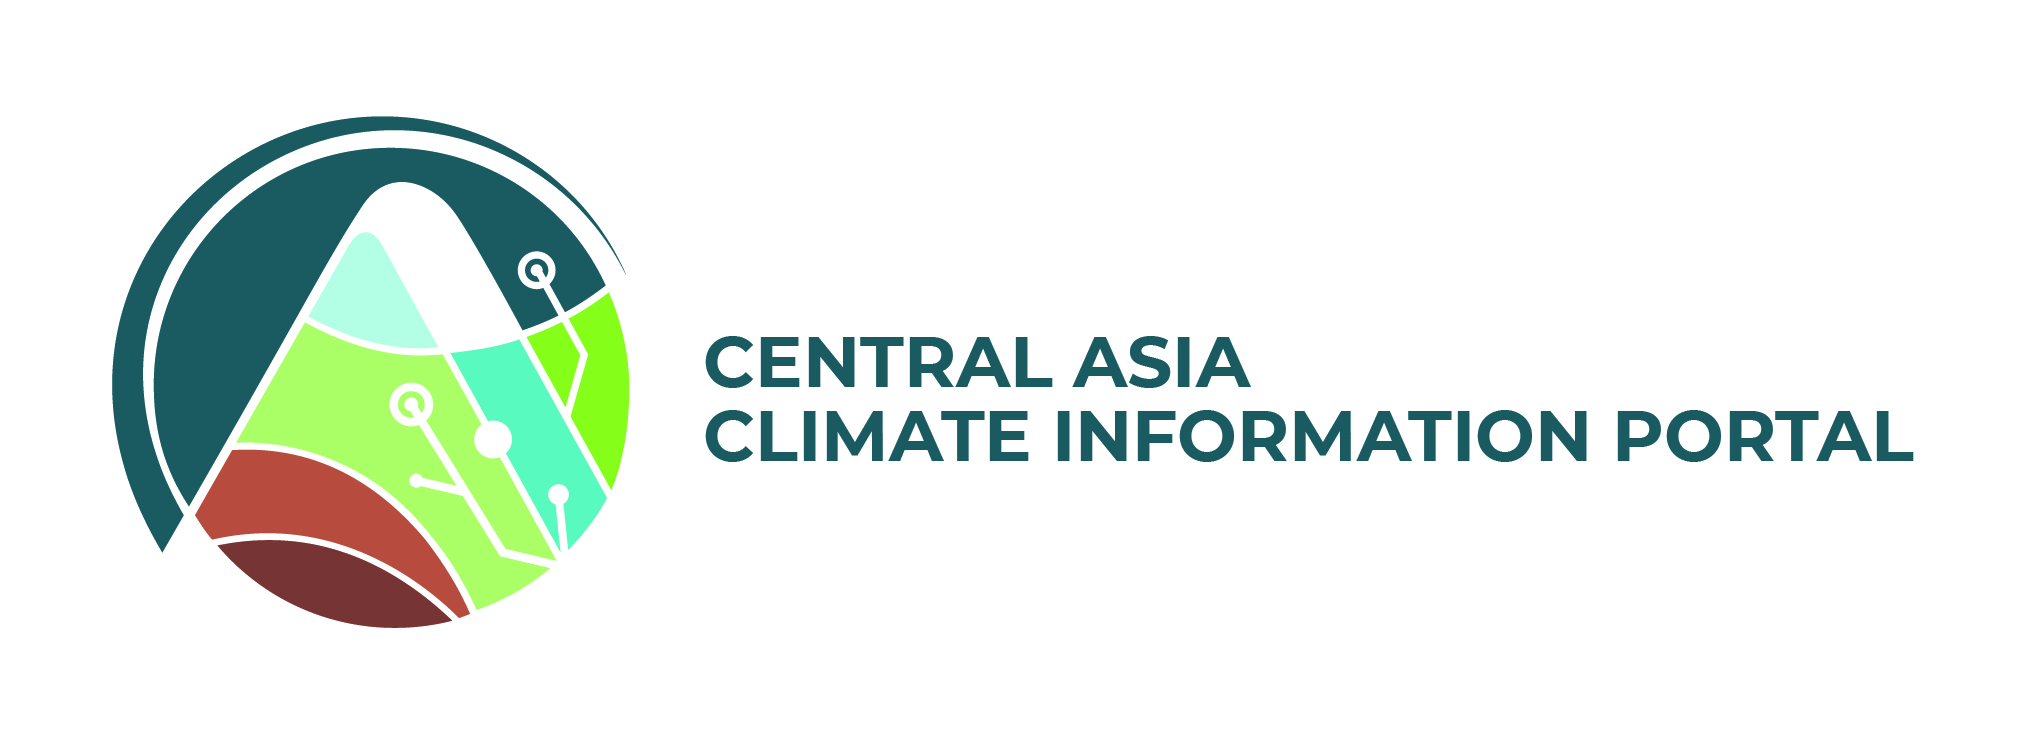 The Central Asia Climate Information Platform (CACIP) for Climate-Resilient Future 